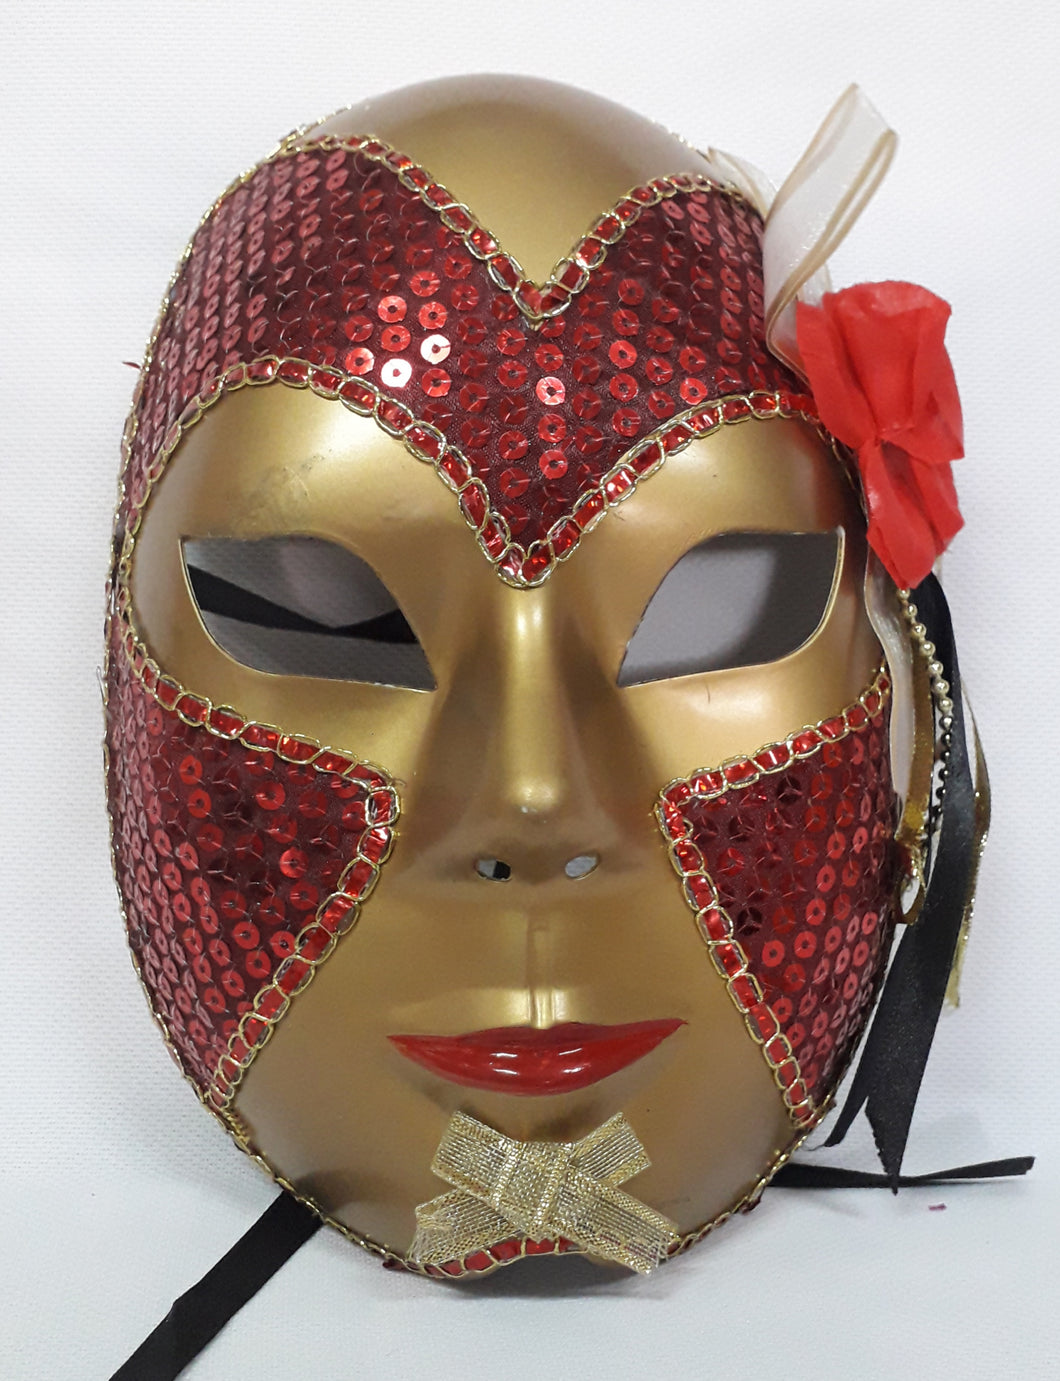 Gold Mask with Beads and Flower Design